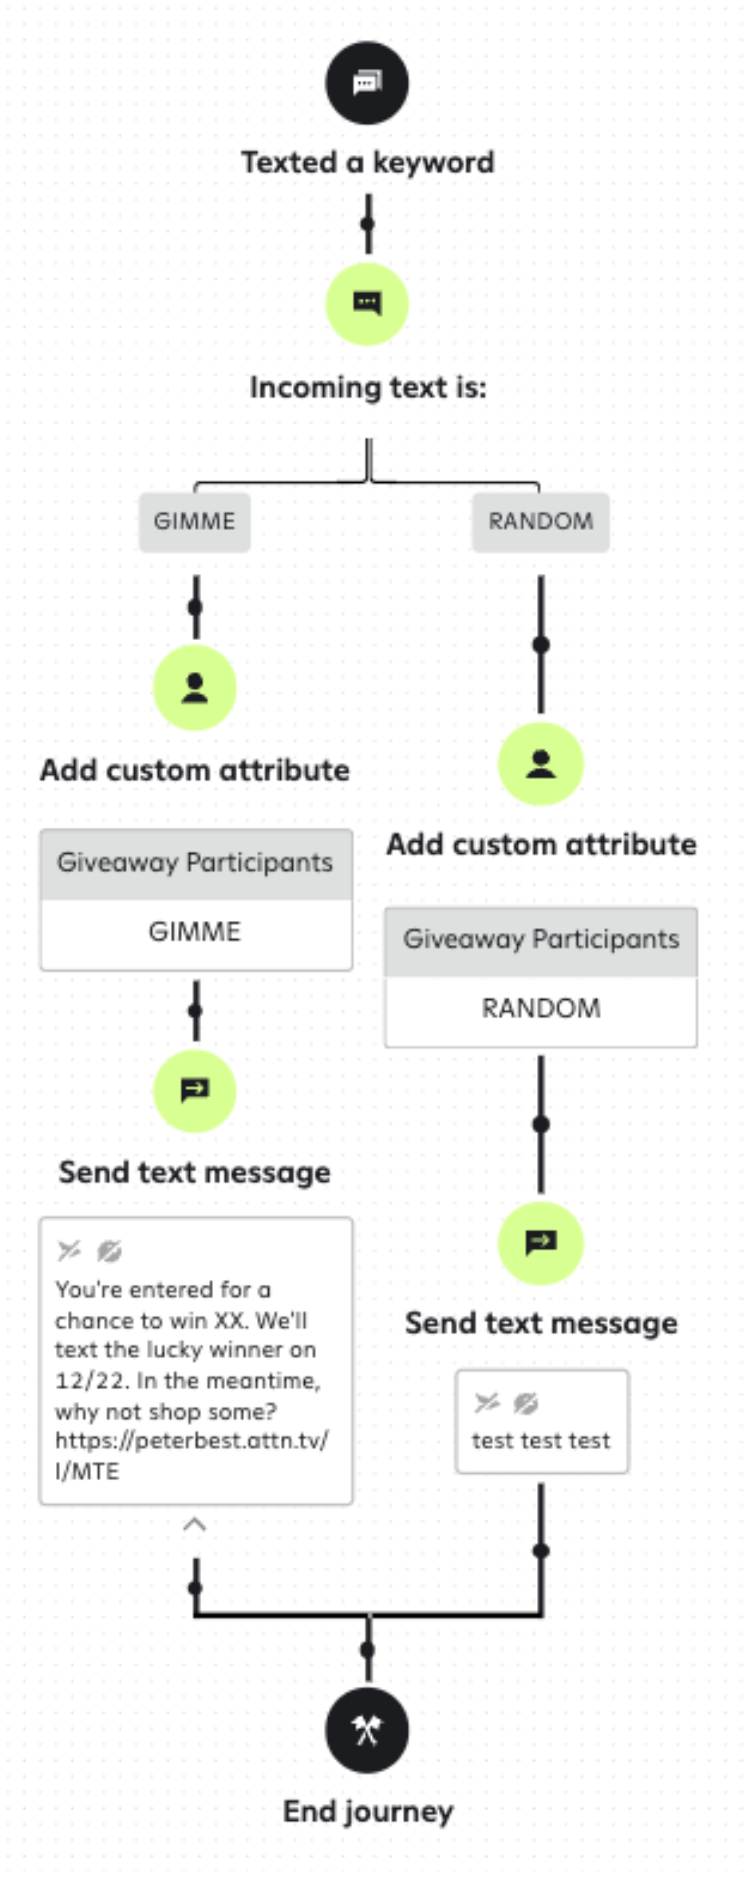 Two-way journeys include text-a-keyword, which enables sending text messages per custom attributes